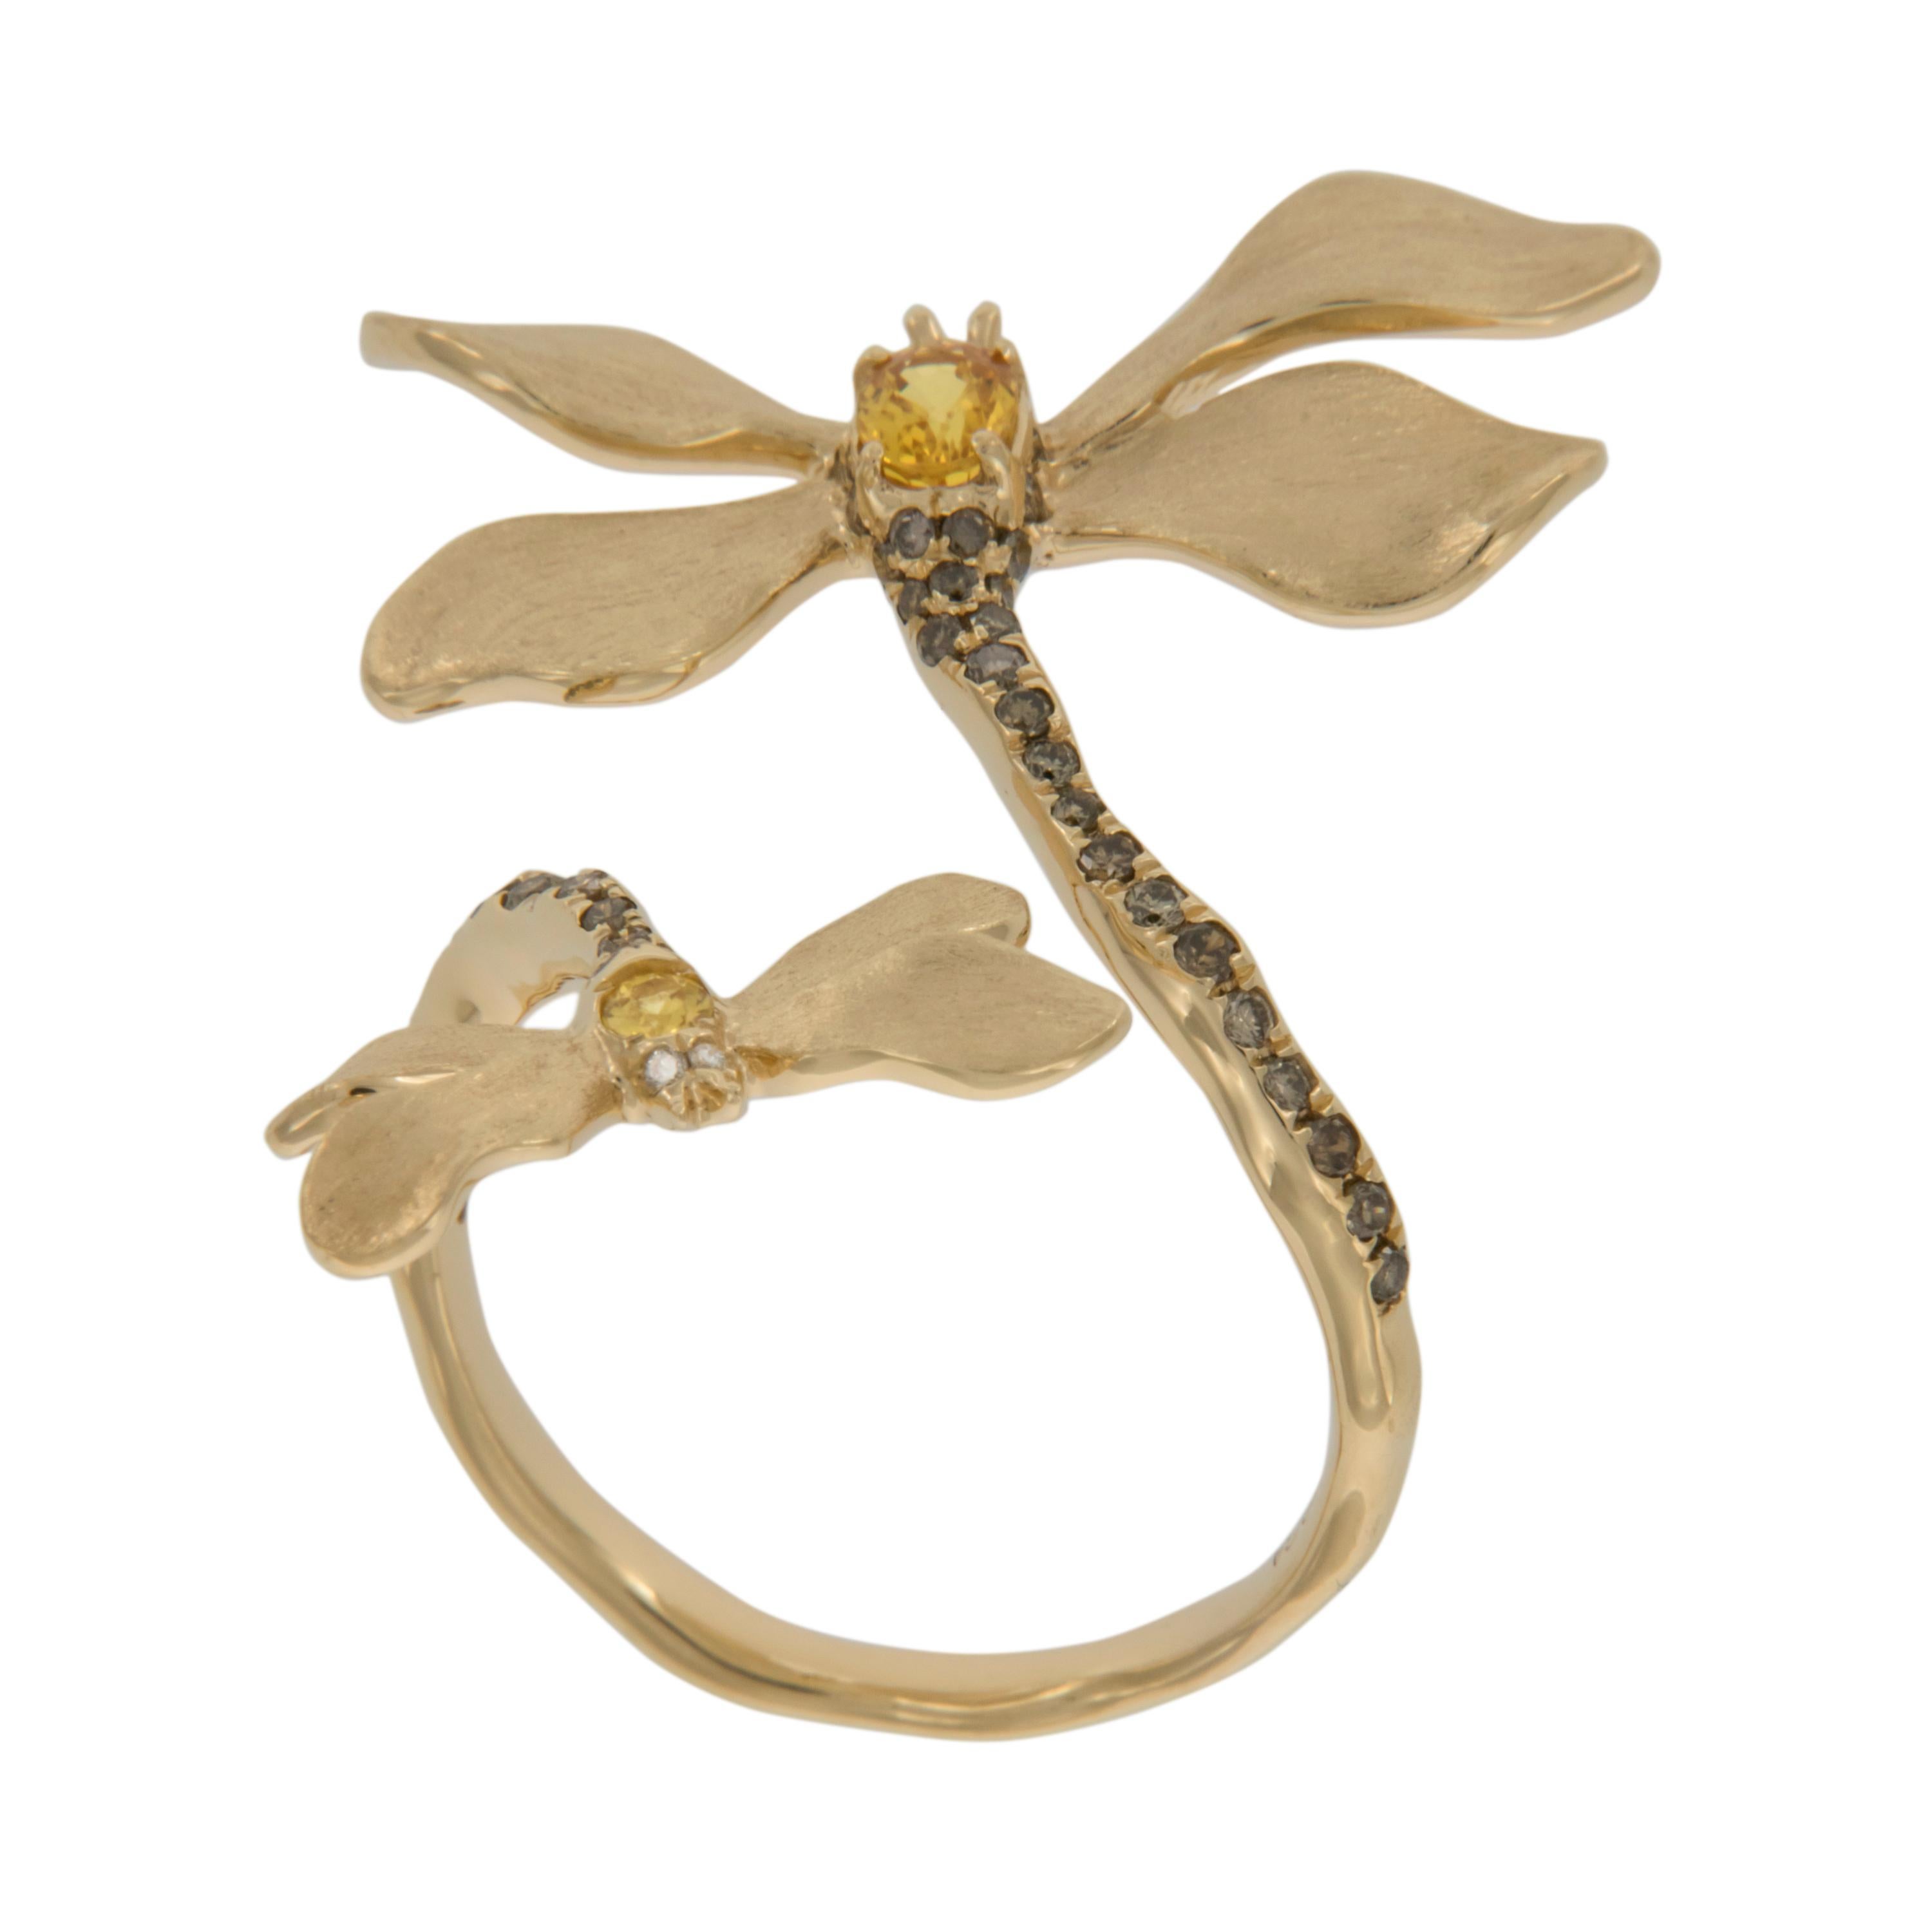 Dragonflies symbolize transformation & rebirth as well as invoking warm feelings of summer. This delightful wrap ring catches that feeling of warmth with 0.35 Cttw sunny yellow sapphires and 0.35 Cttw brown diamonds. Ring is a size 7 but can be